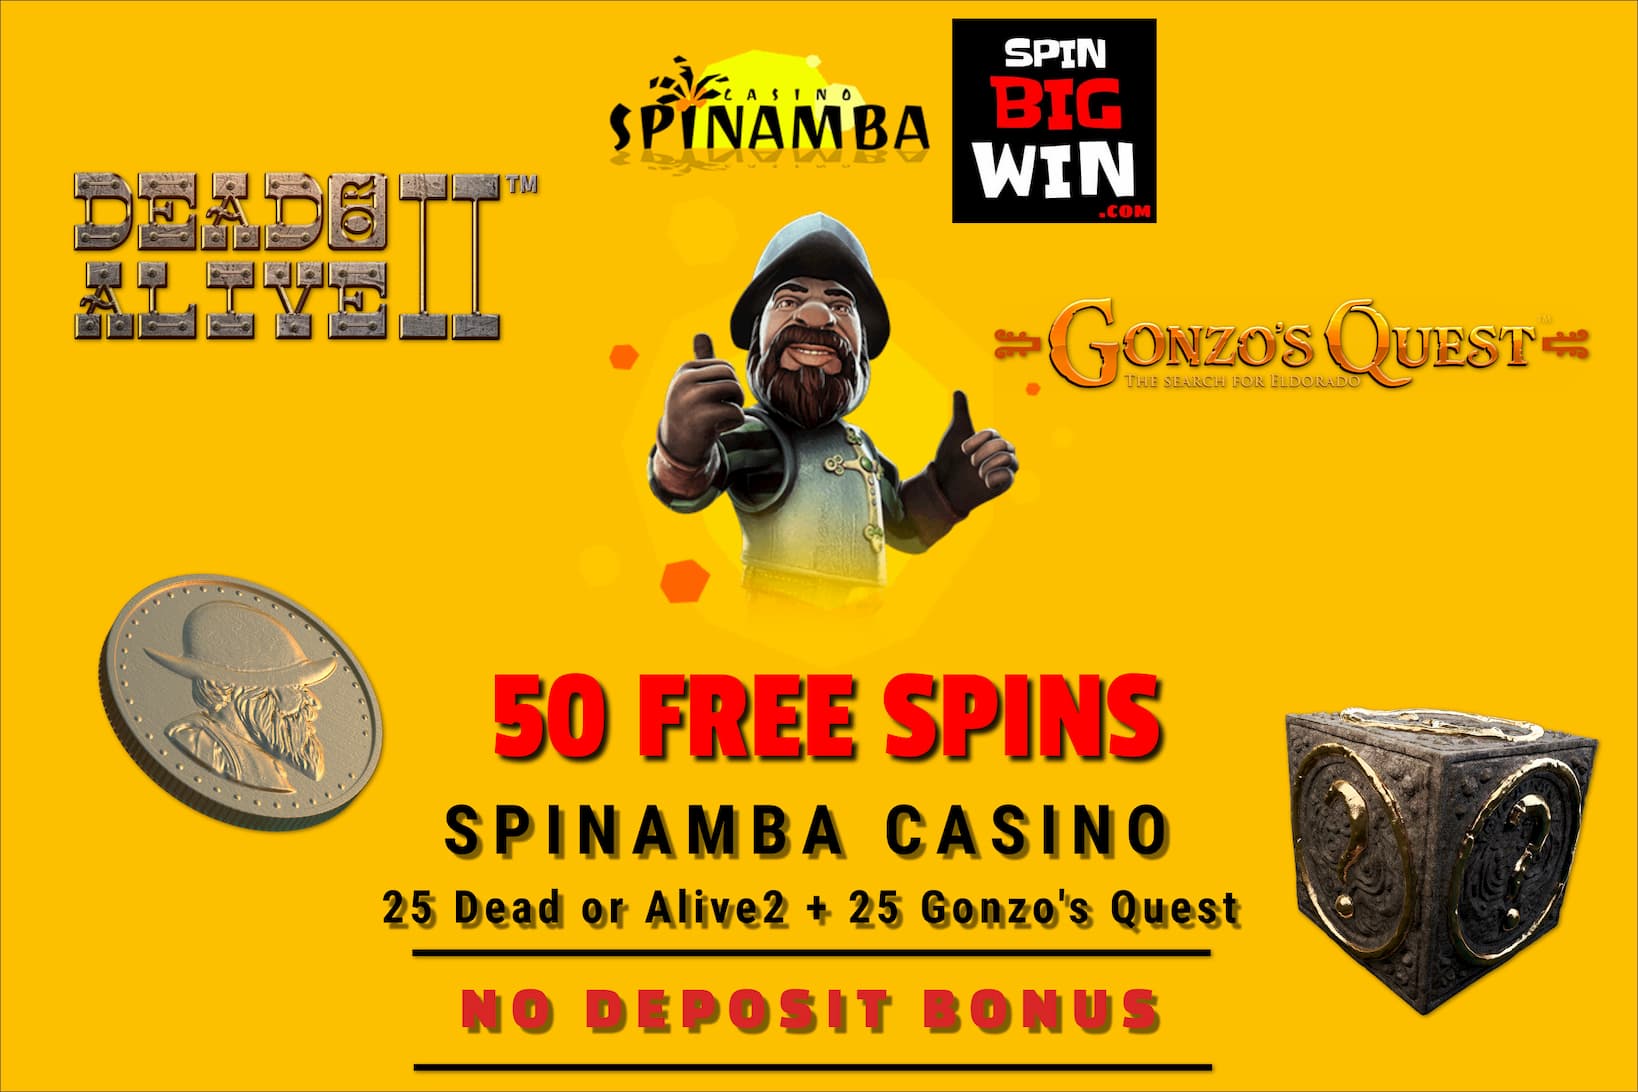 Spinamba Casino Review No Deposit Bonus (50 Free Spins) is in this photo!